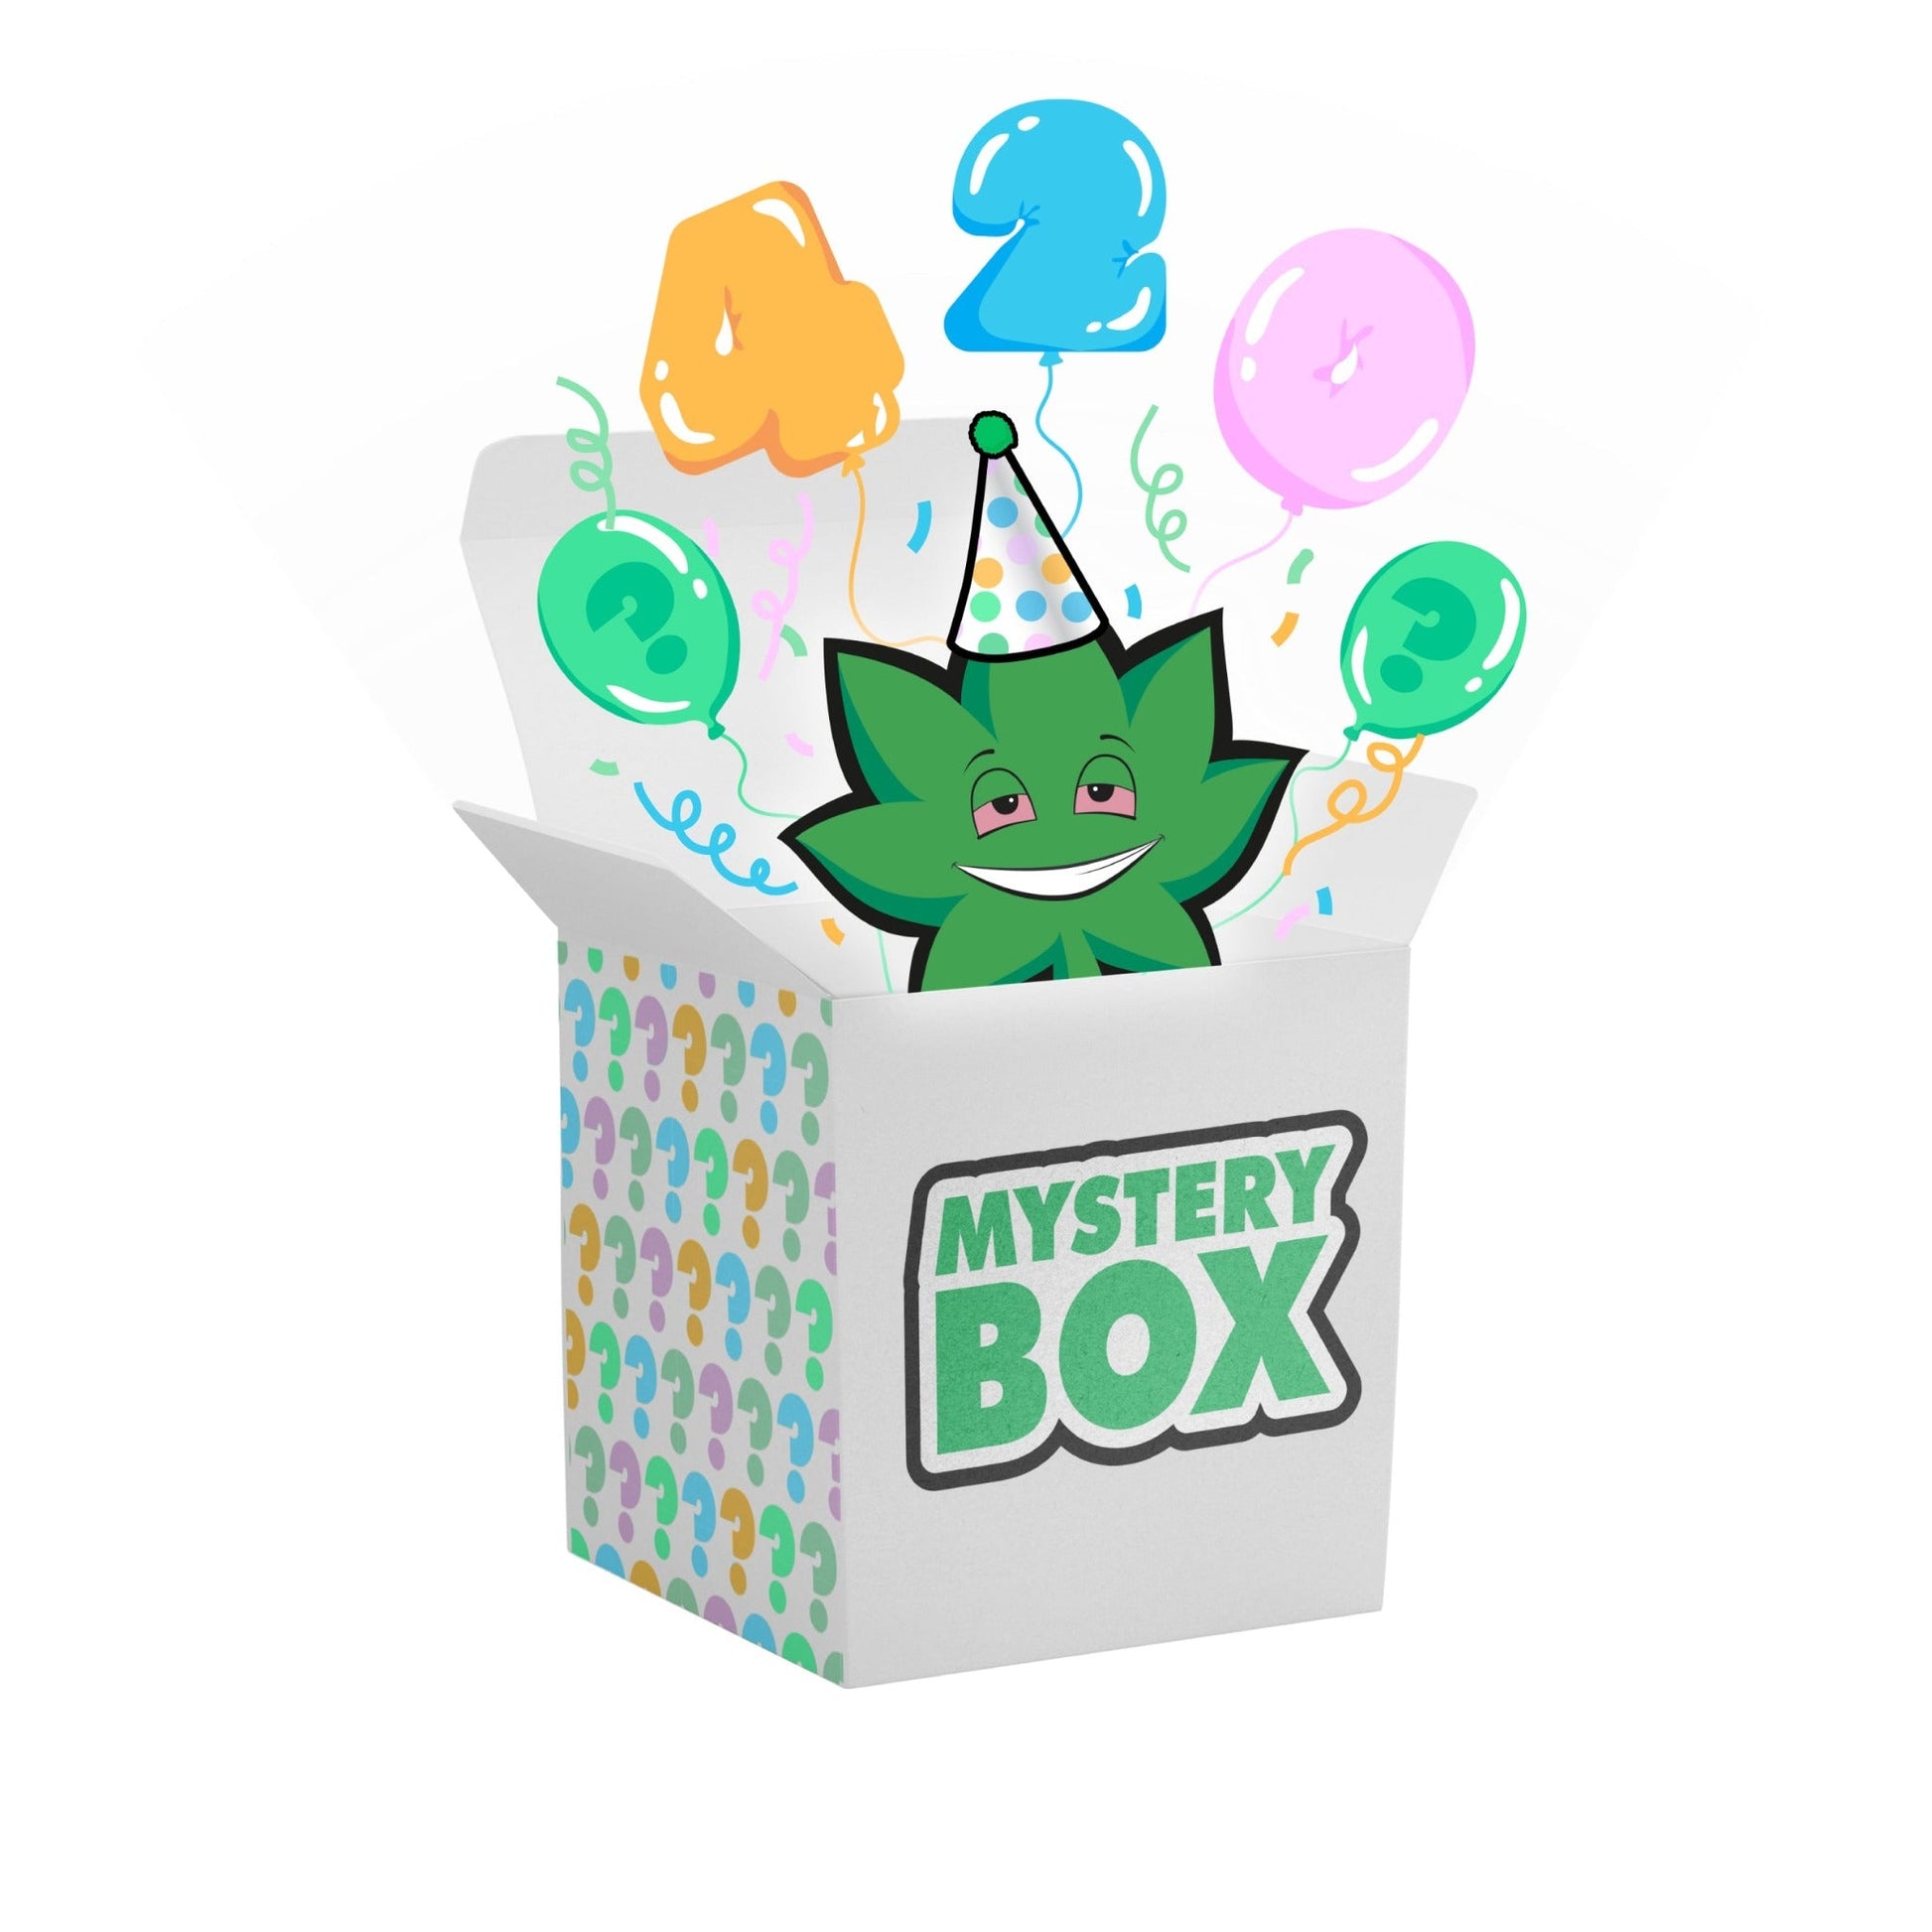 Spike Leafs' B-Day Mystery Box Lifted